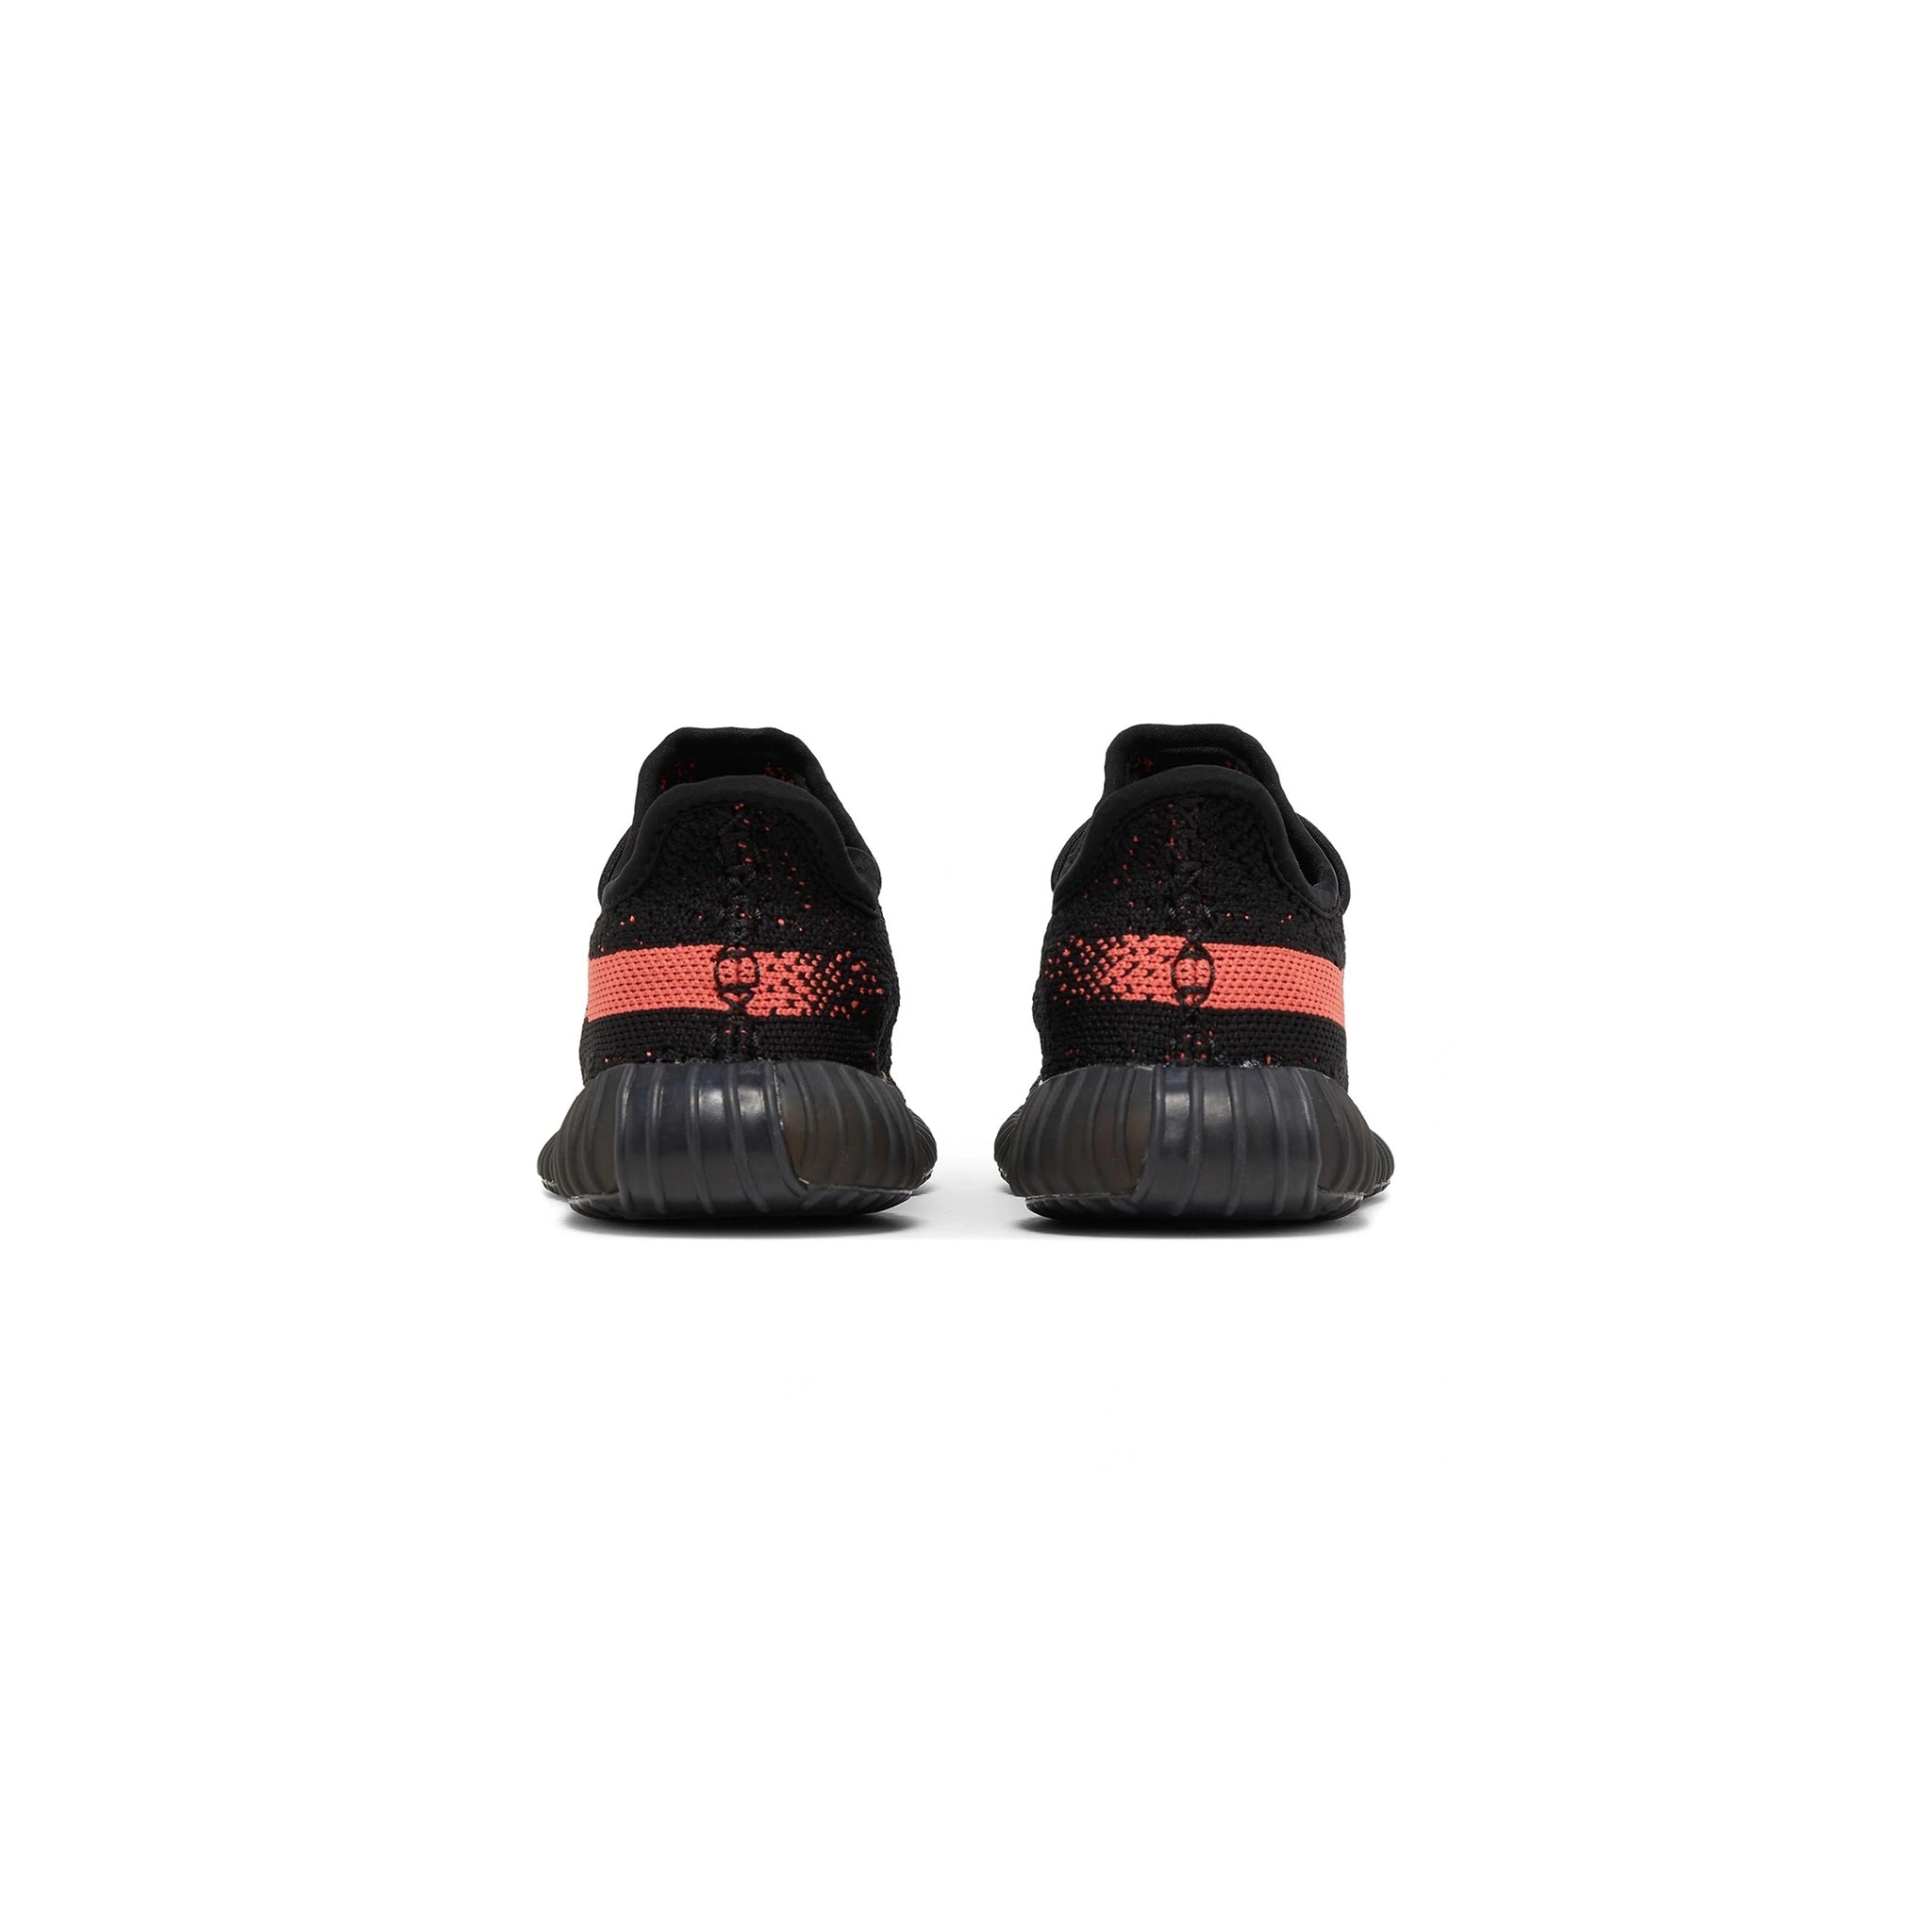 Back view of Adidas Yeezy Boost 350 V2 Infants Core Black Red HP6587